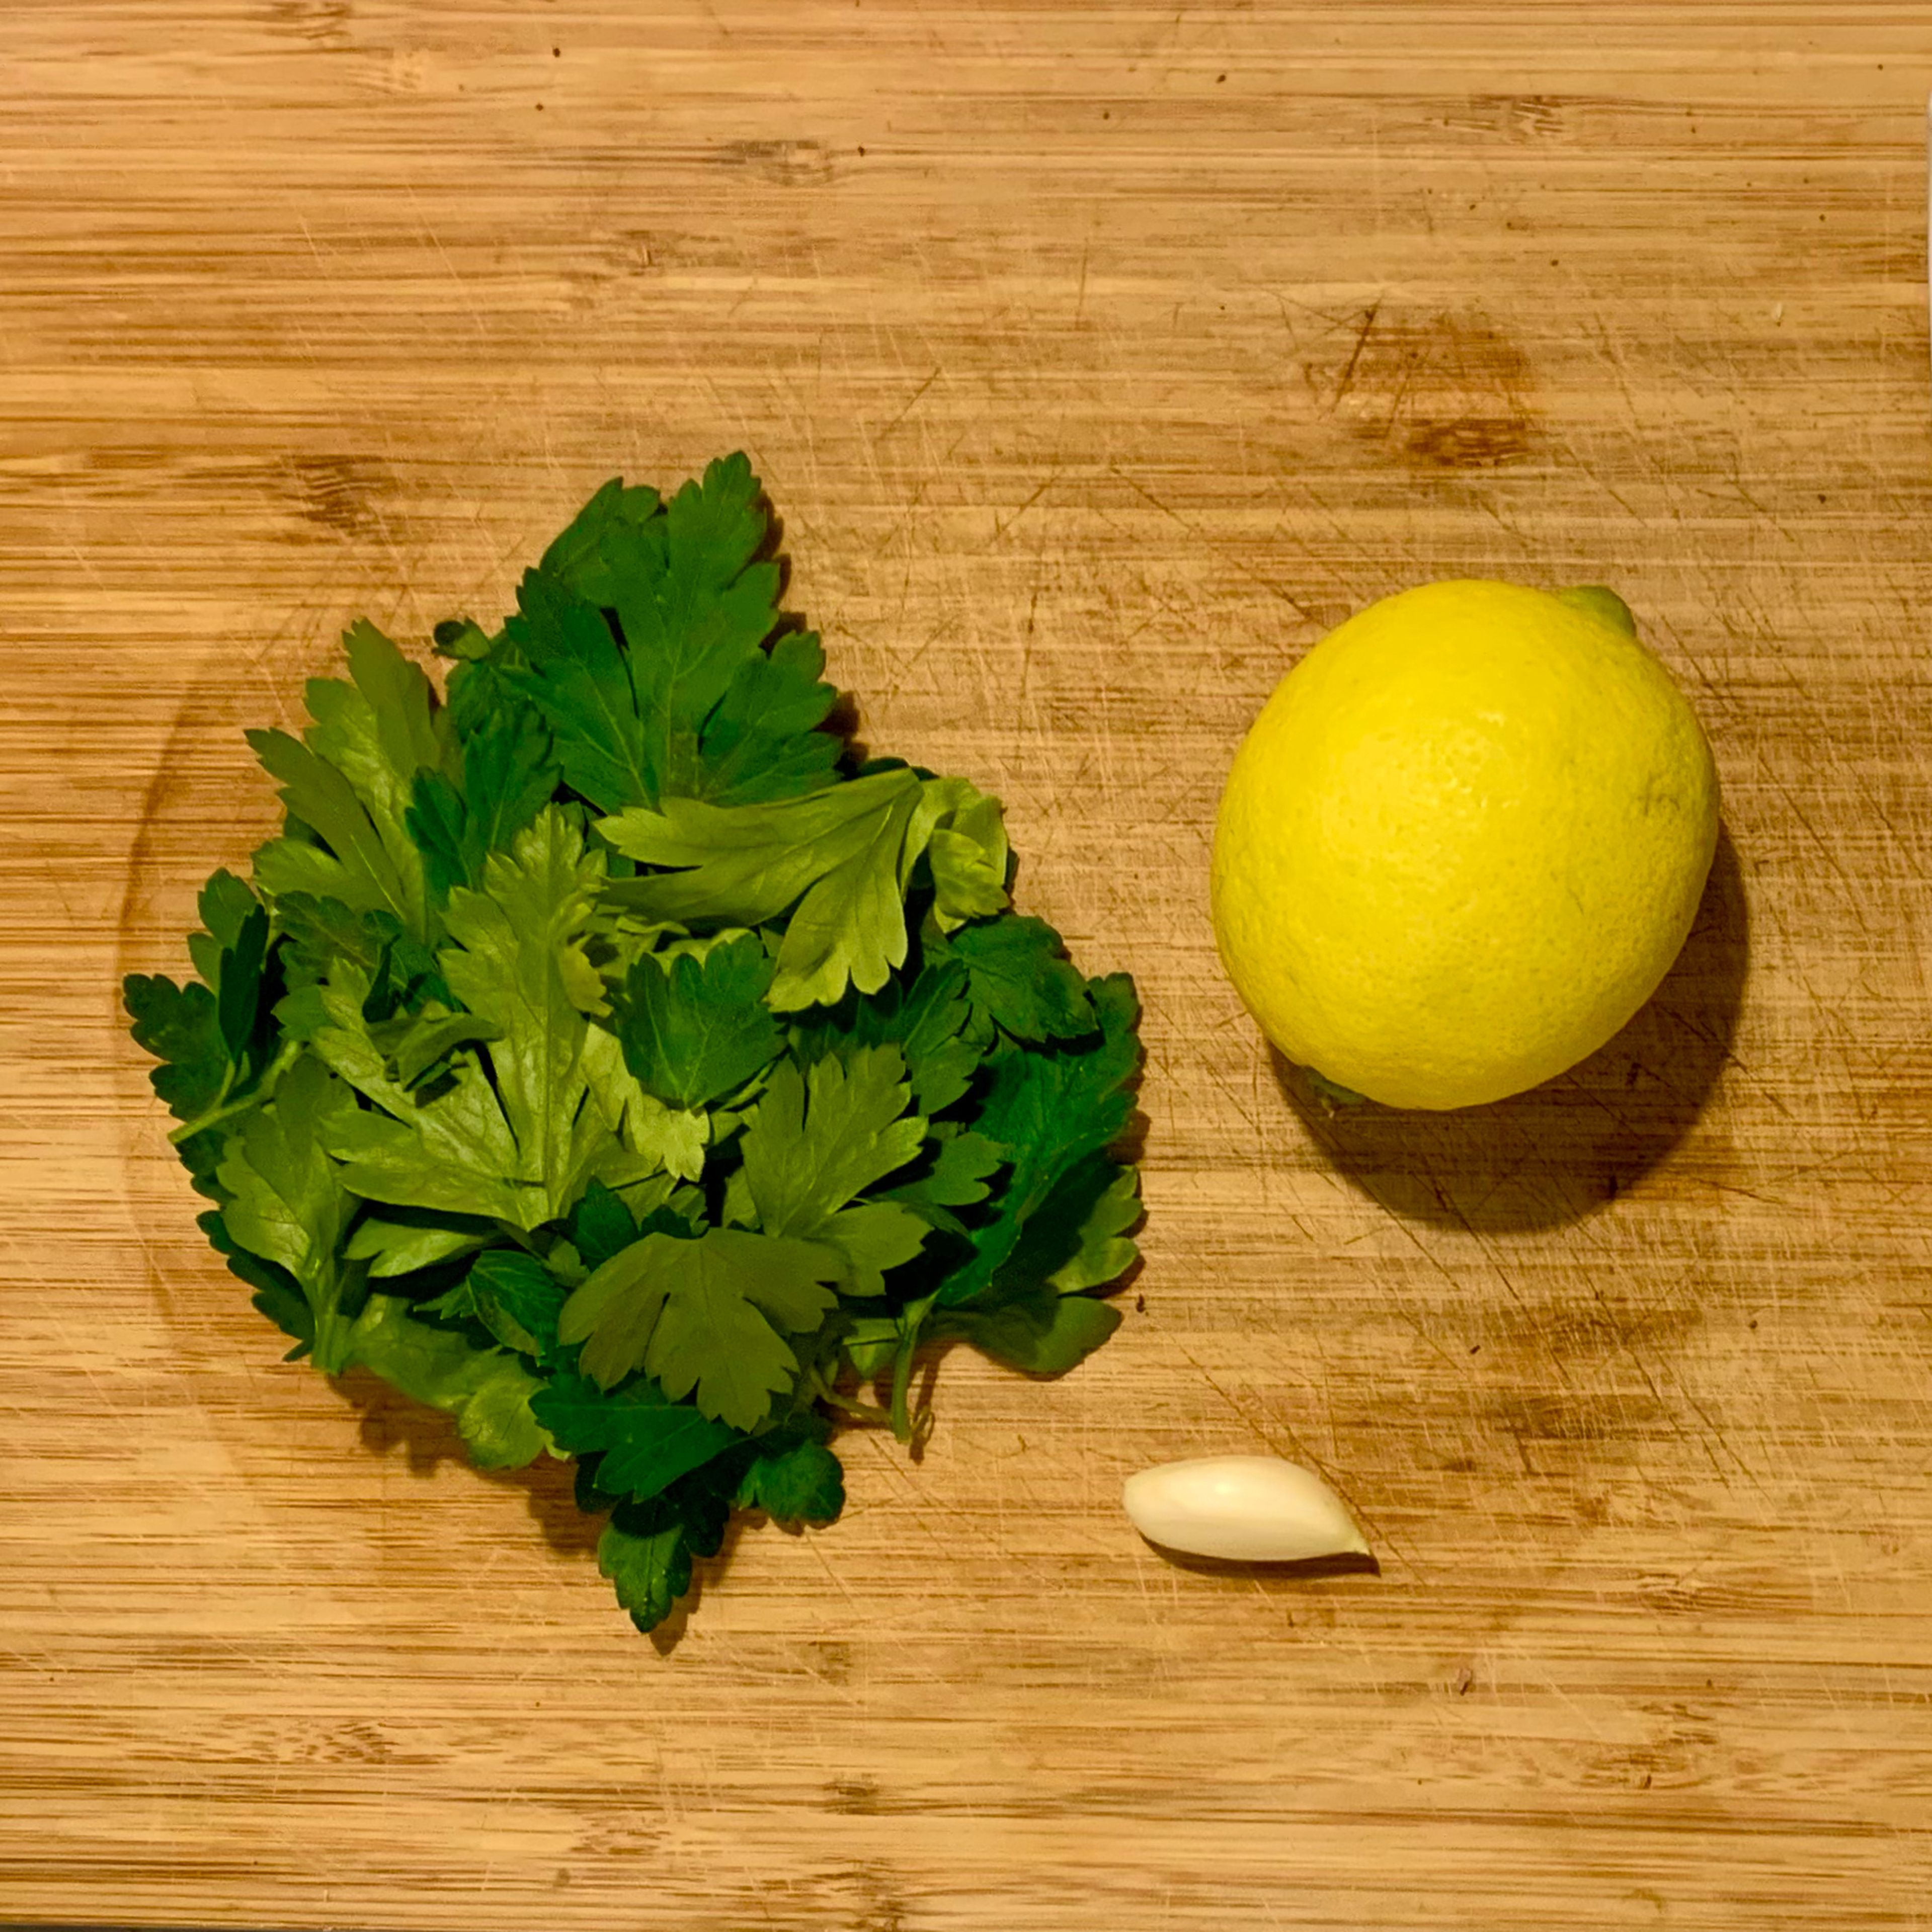 Chop the parsley, squeeze 1 lemon, and crush the garlic